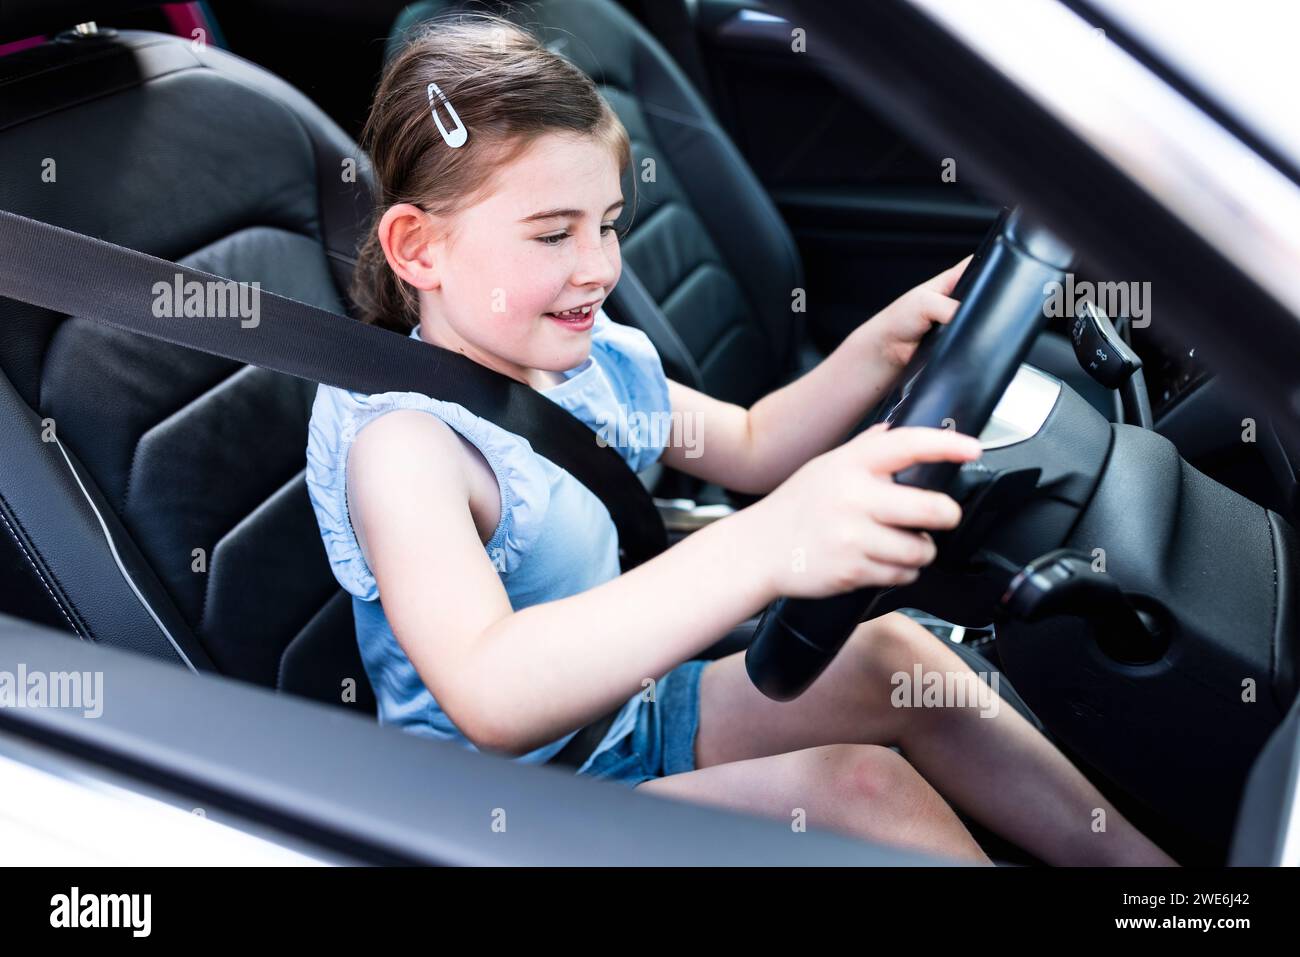 Excited girl holding steering wheel sitting in car Stock Photo